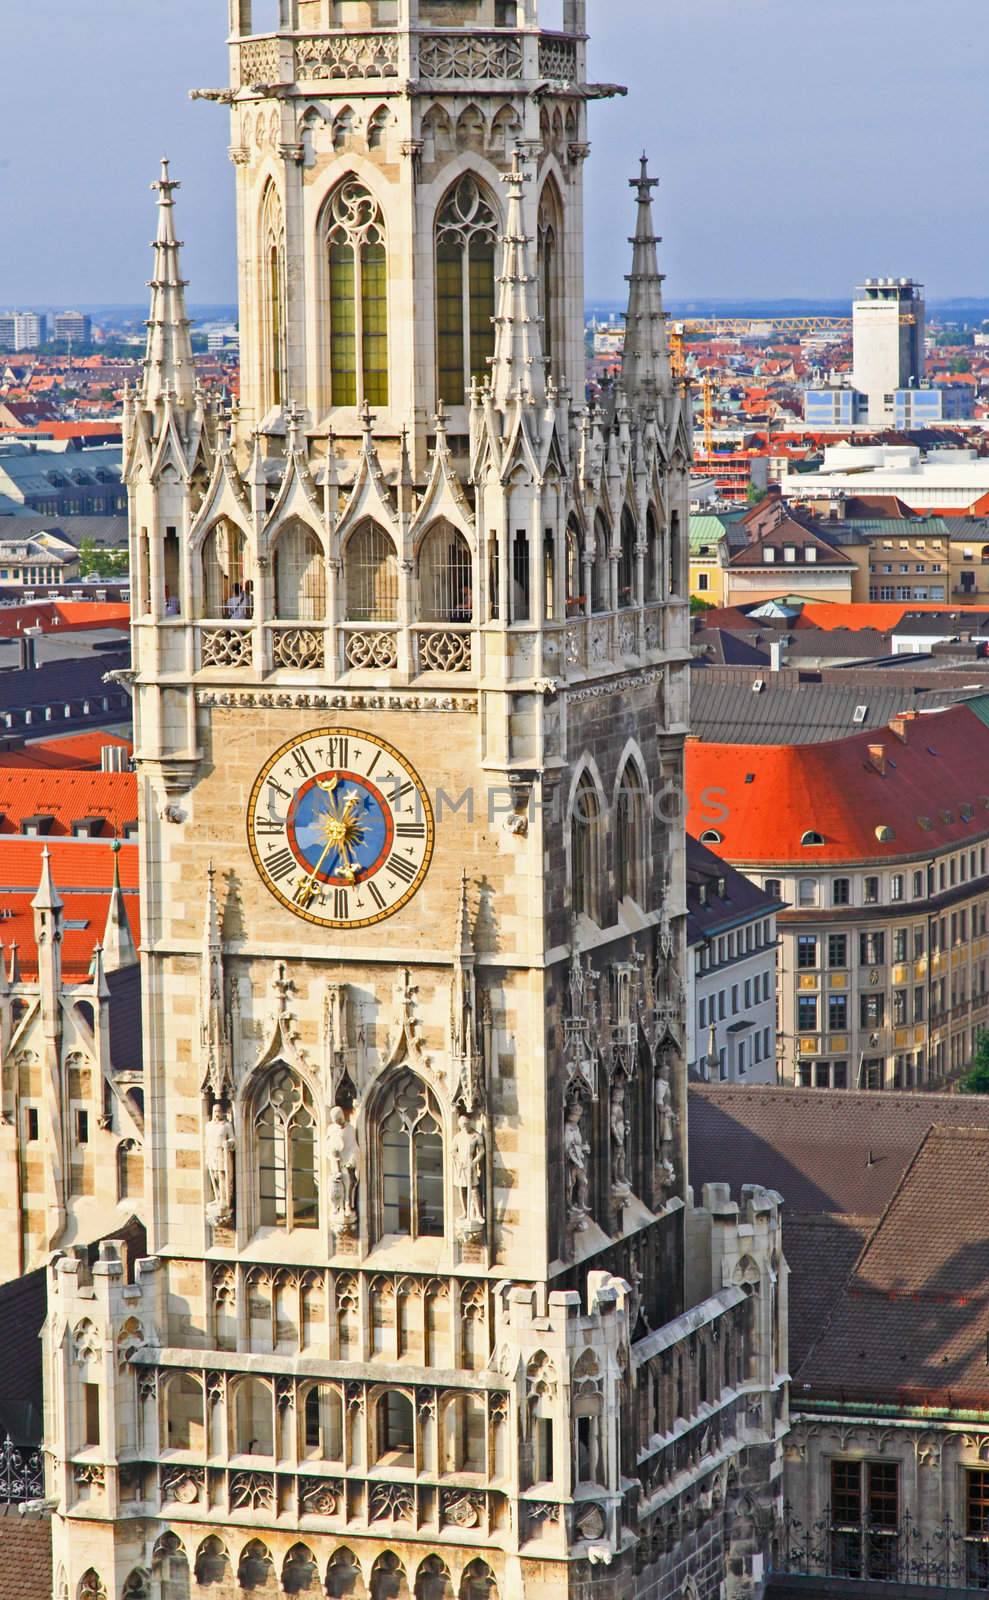 The aerial view of Munich city center from the tower of the Peterskirche